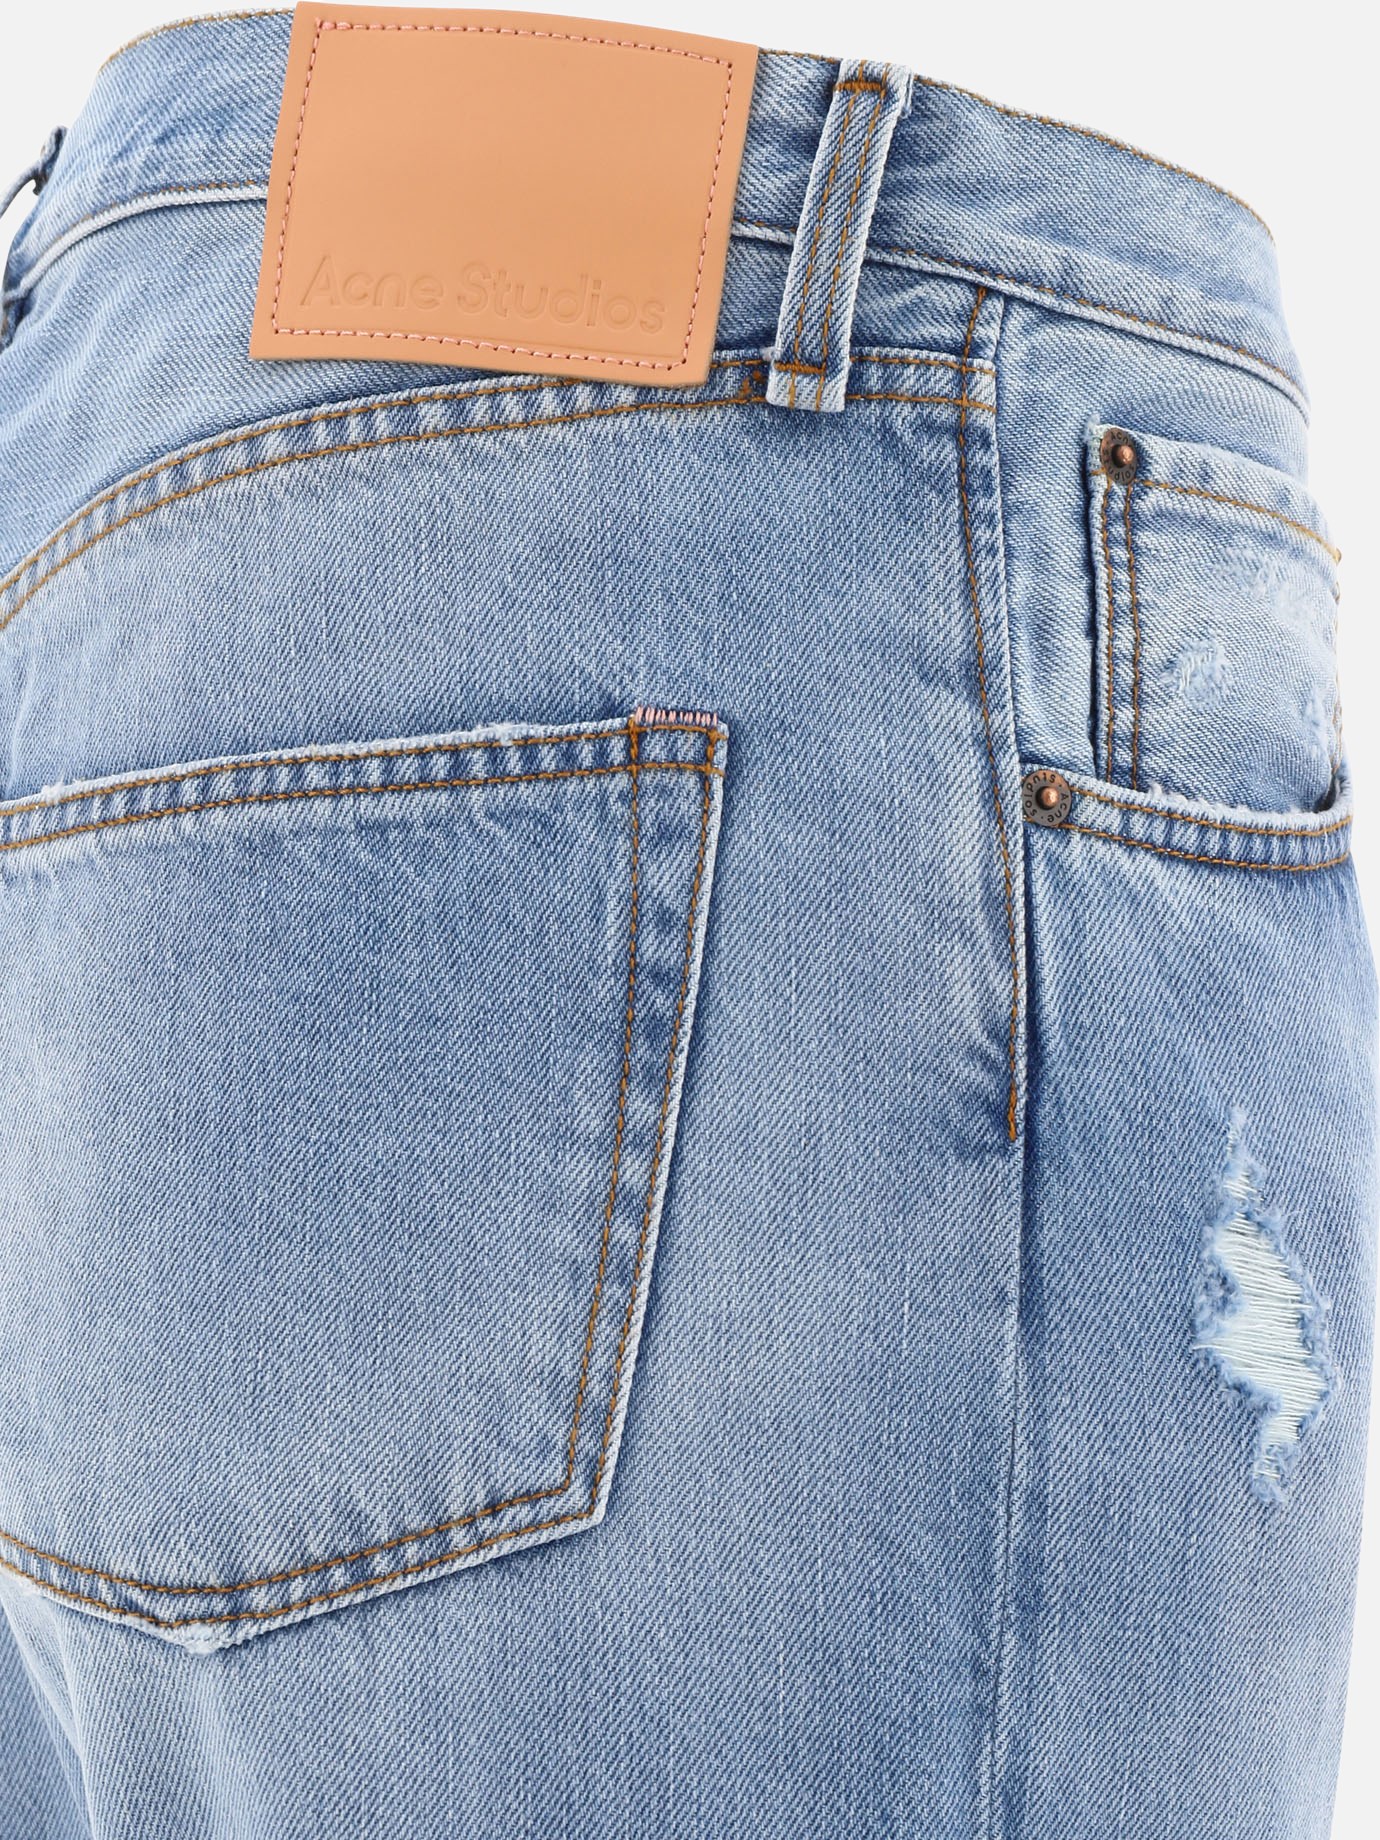 Jeans a gamba dritta by Acne Studios